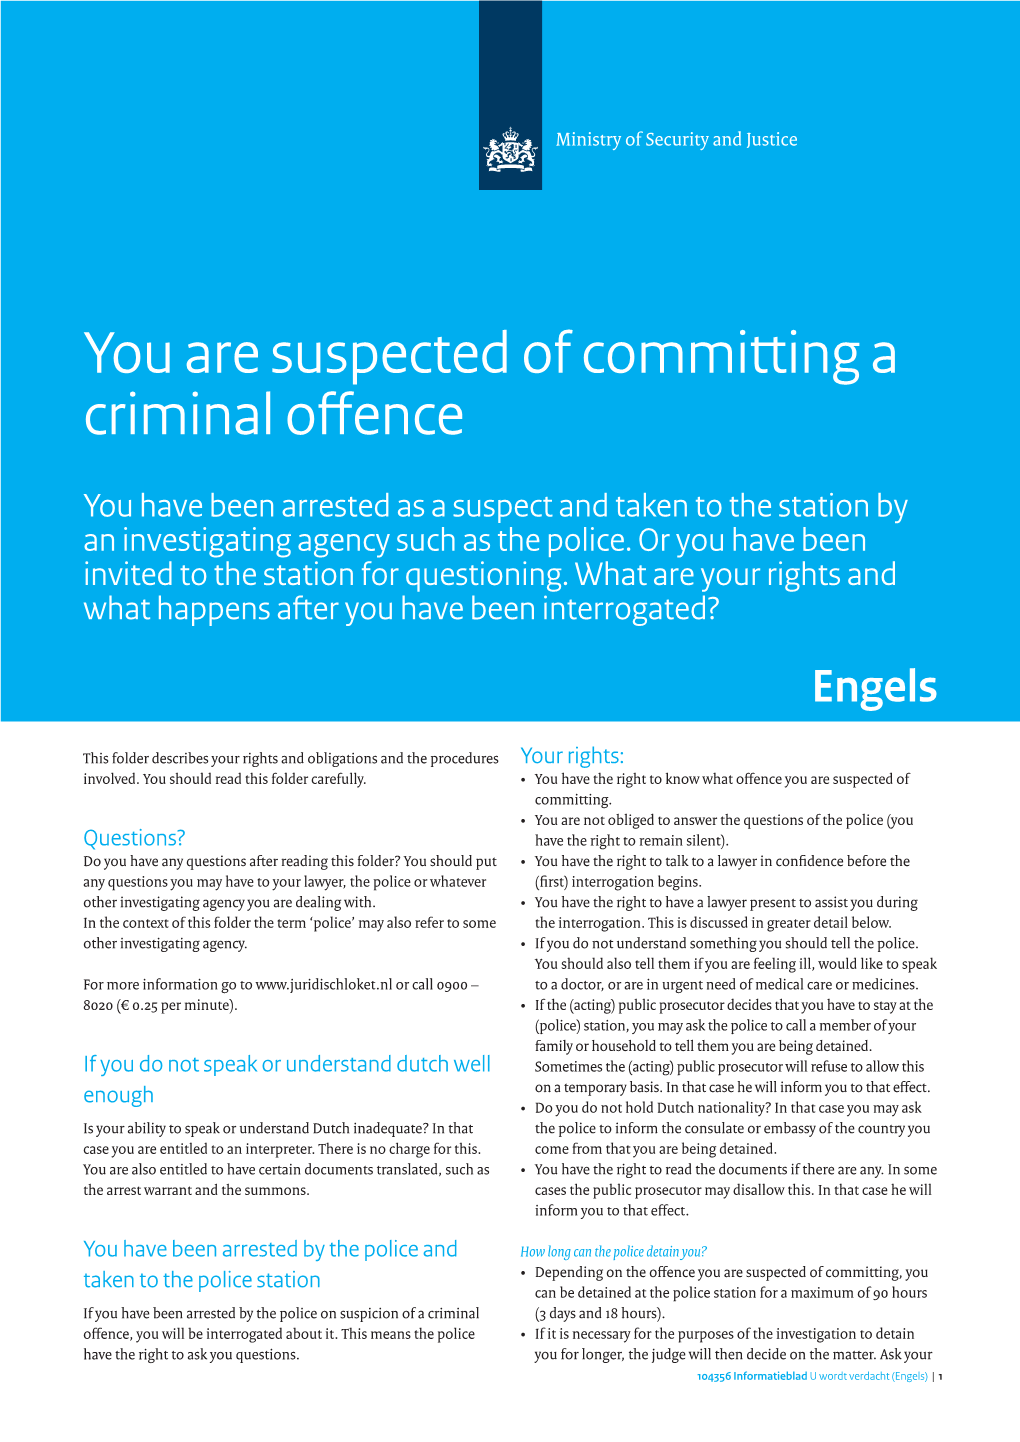 You Are Suspected of Committing a Criminal Offence